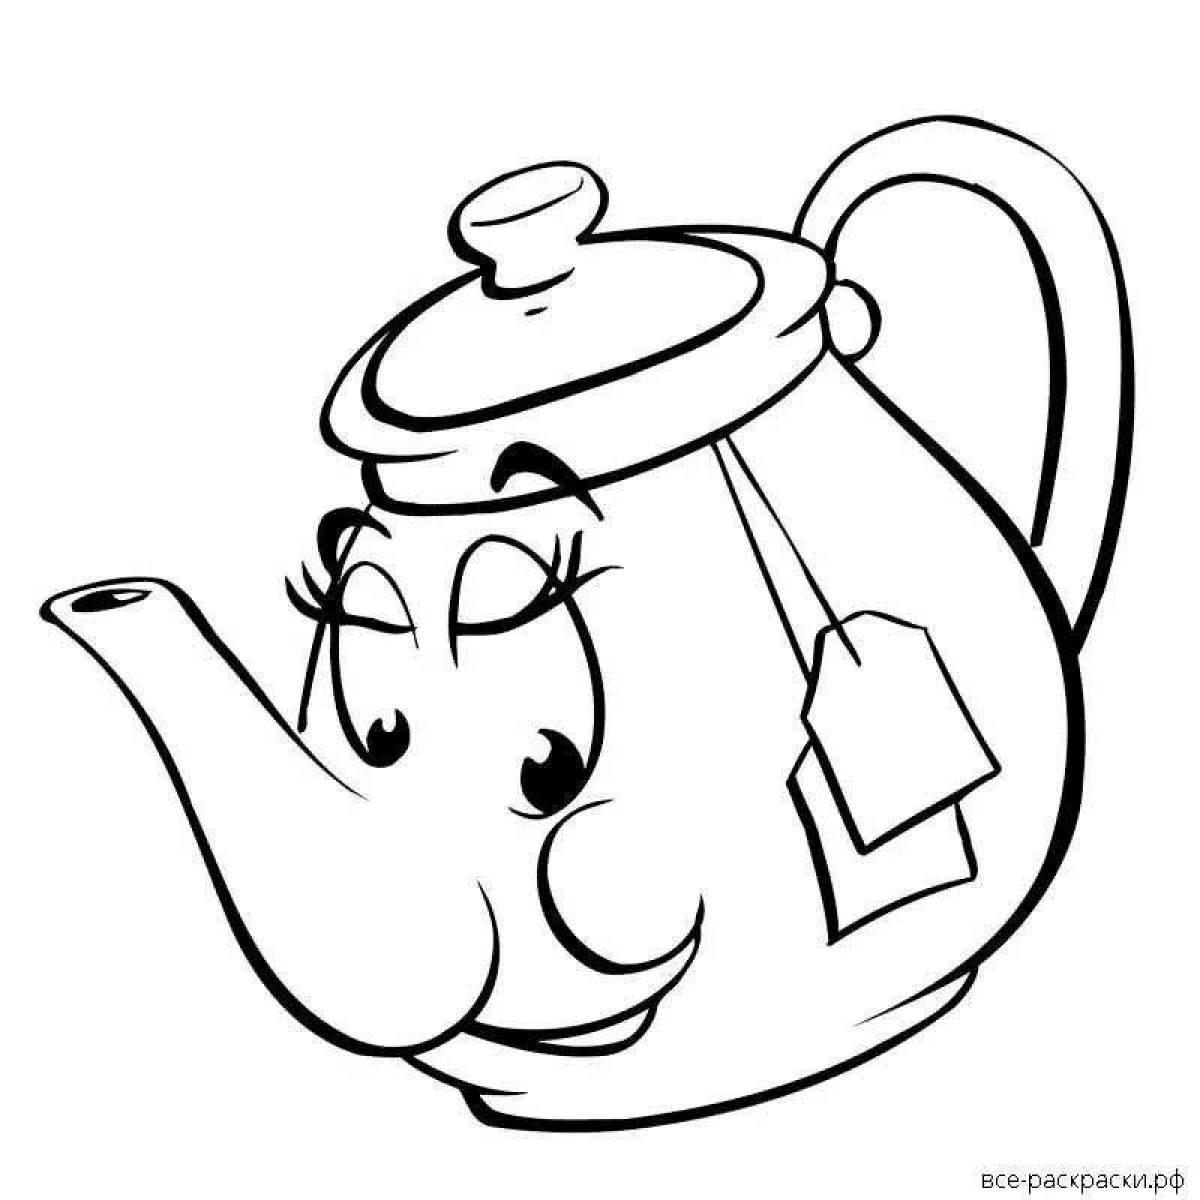 Charming teapot coloring page